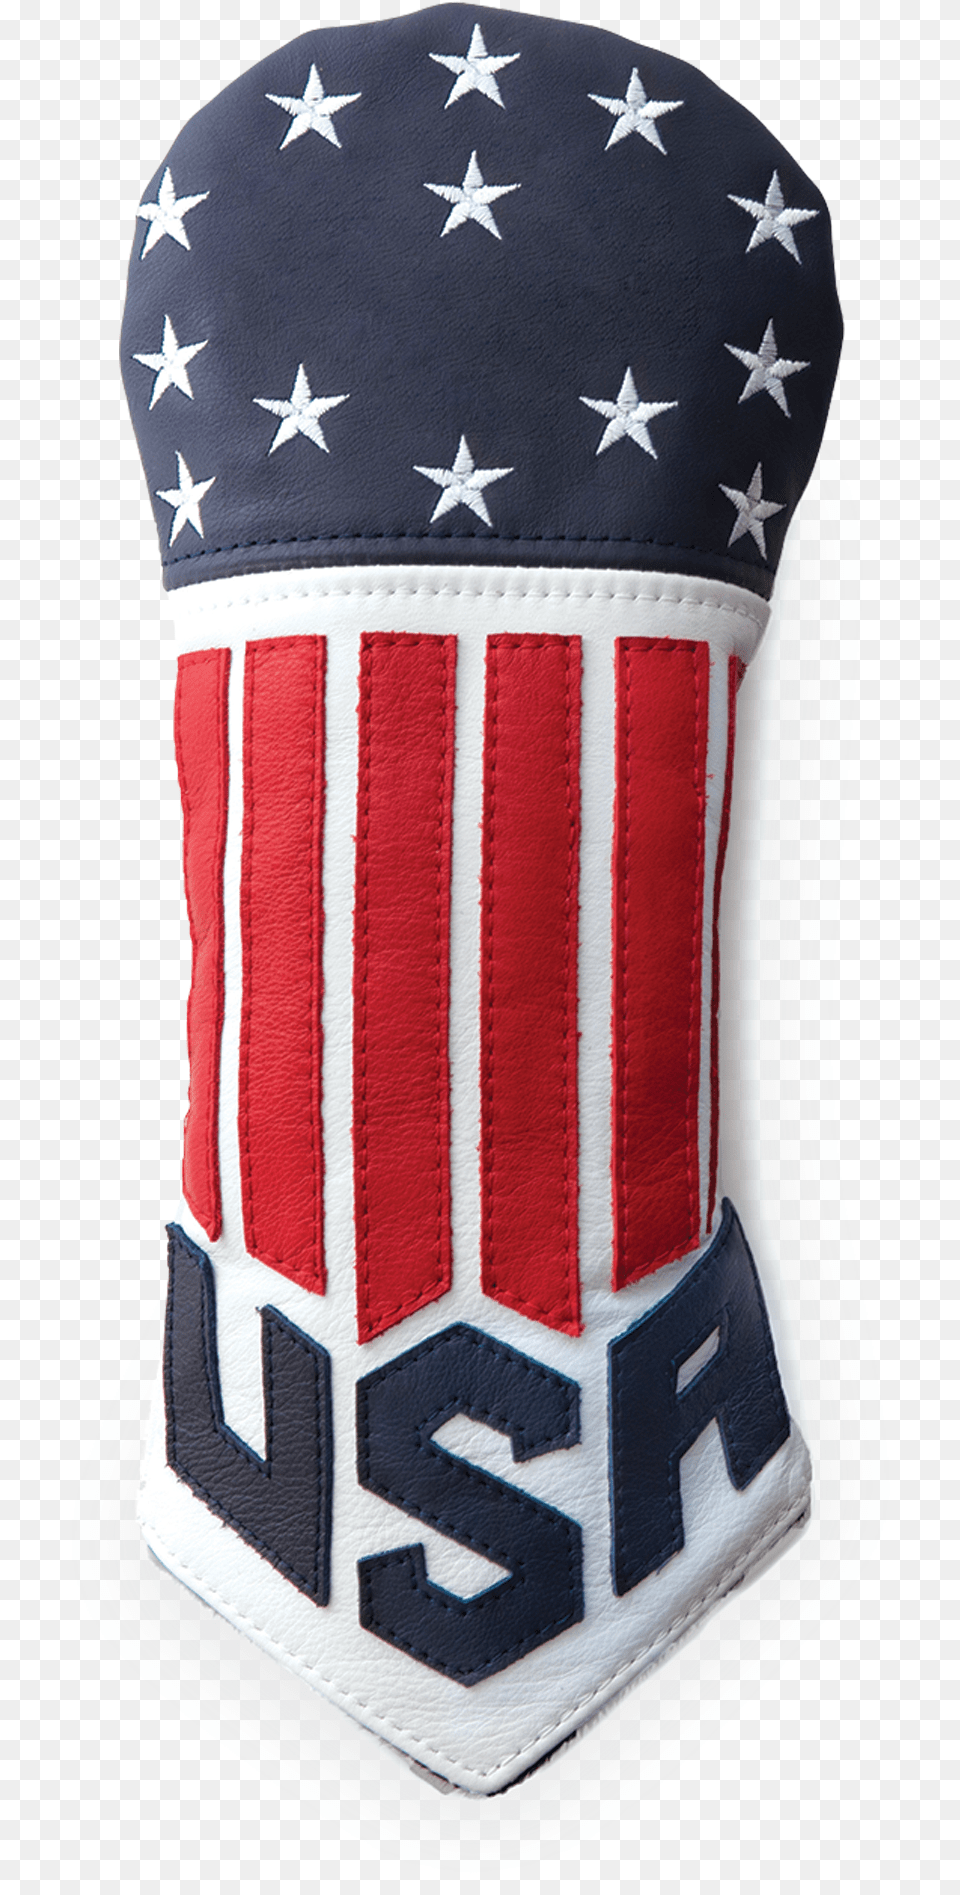 King Chair Trump Headcover, Clothing, Hat, Glove Png